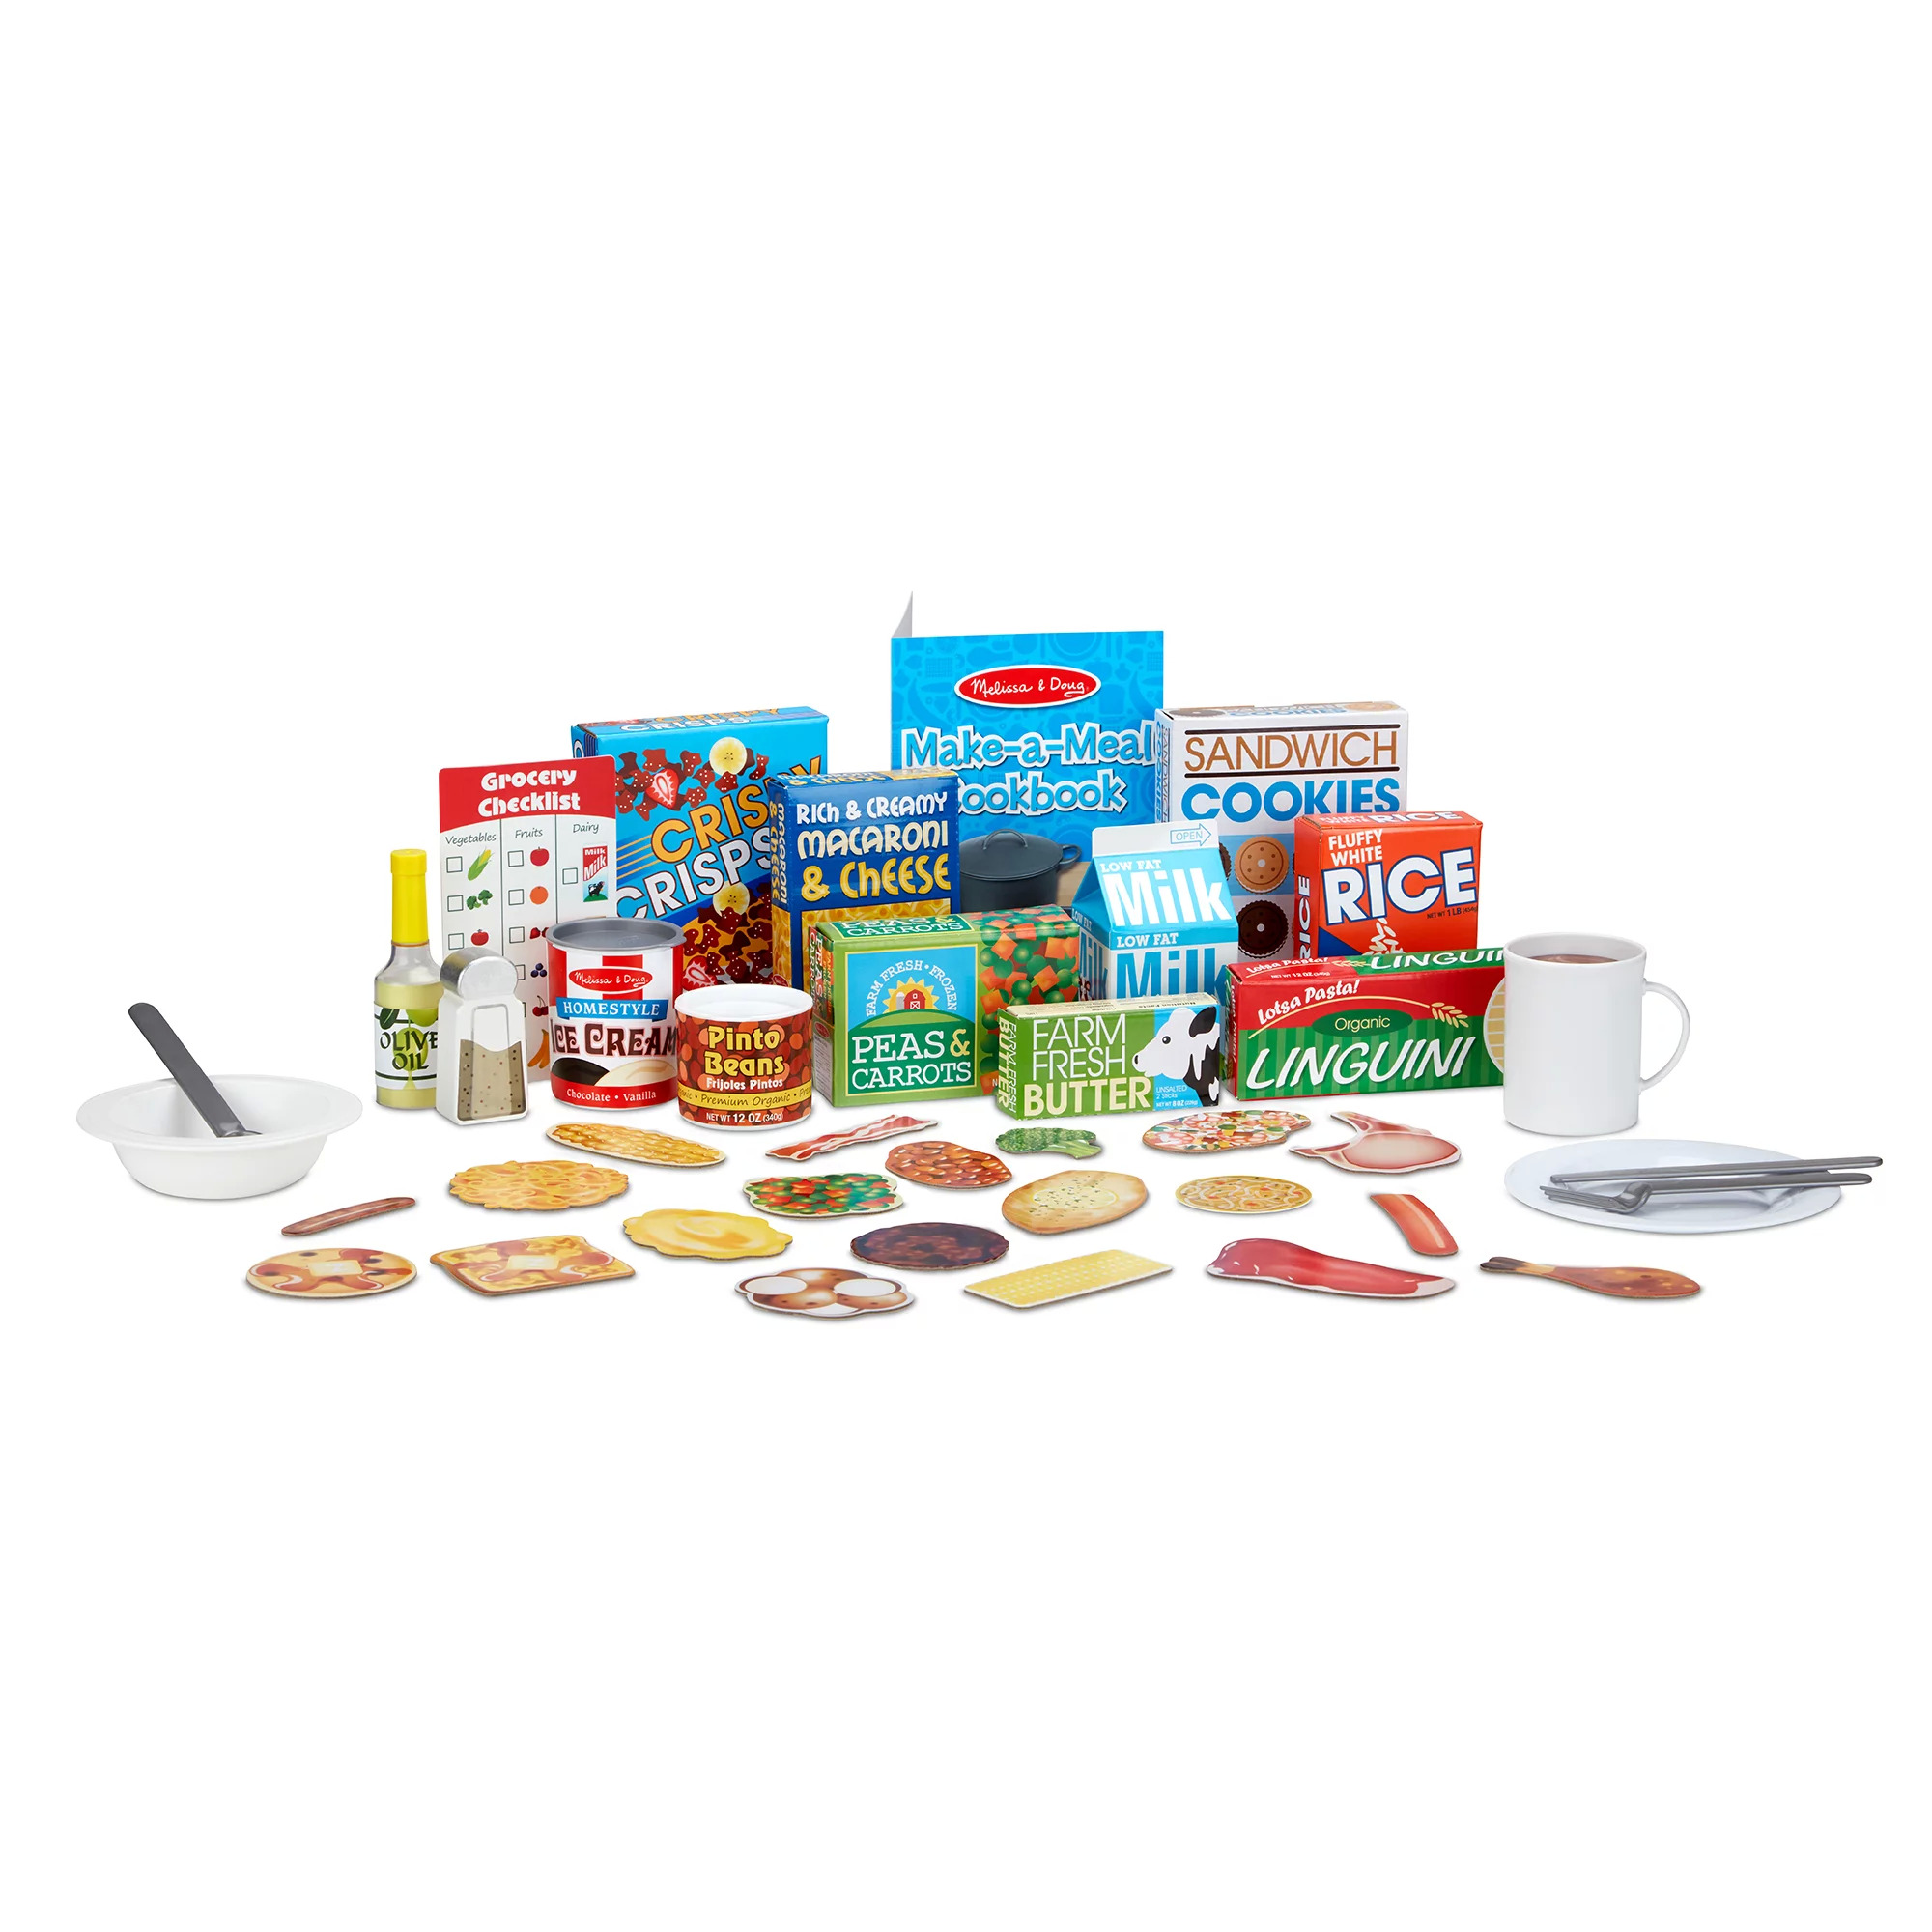 Melissa & Doug Deluxe Kitchen Collection Cooking & Play Food Set – 58 Pieces $9.96